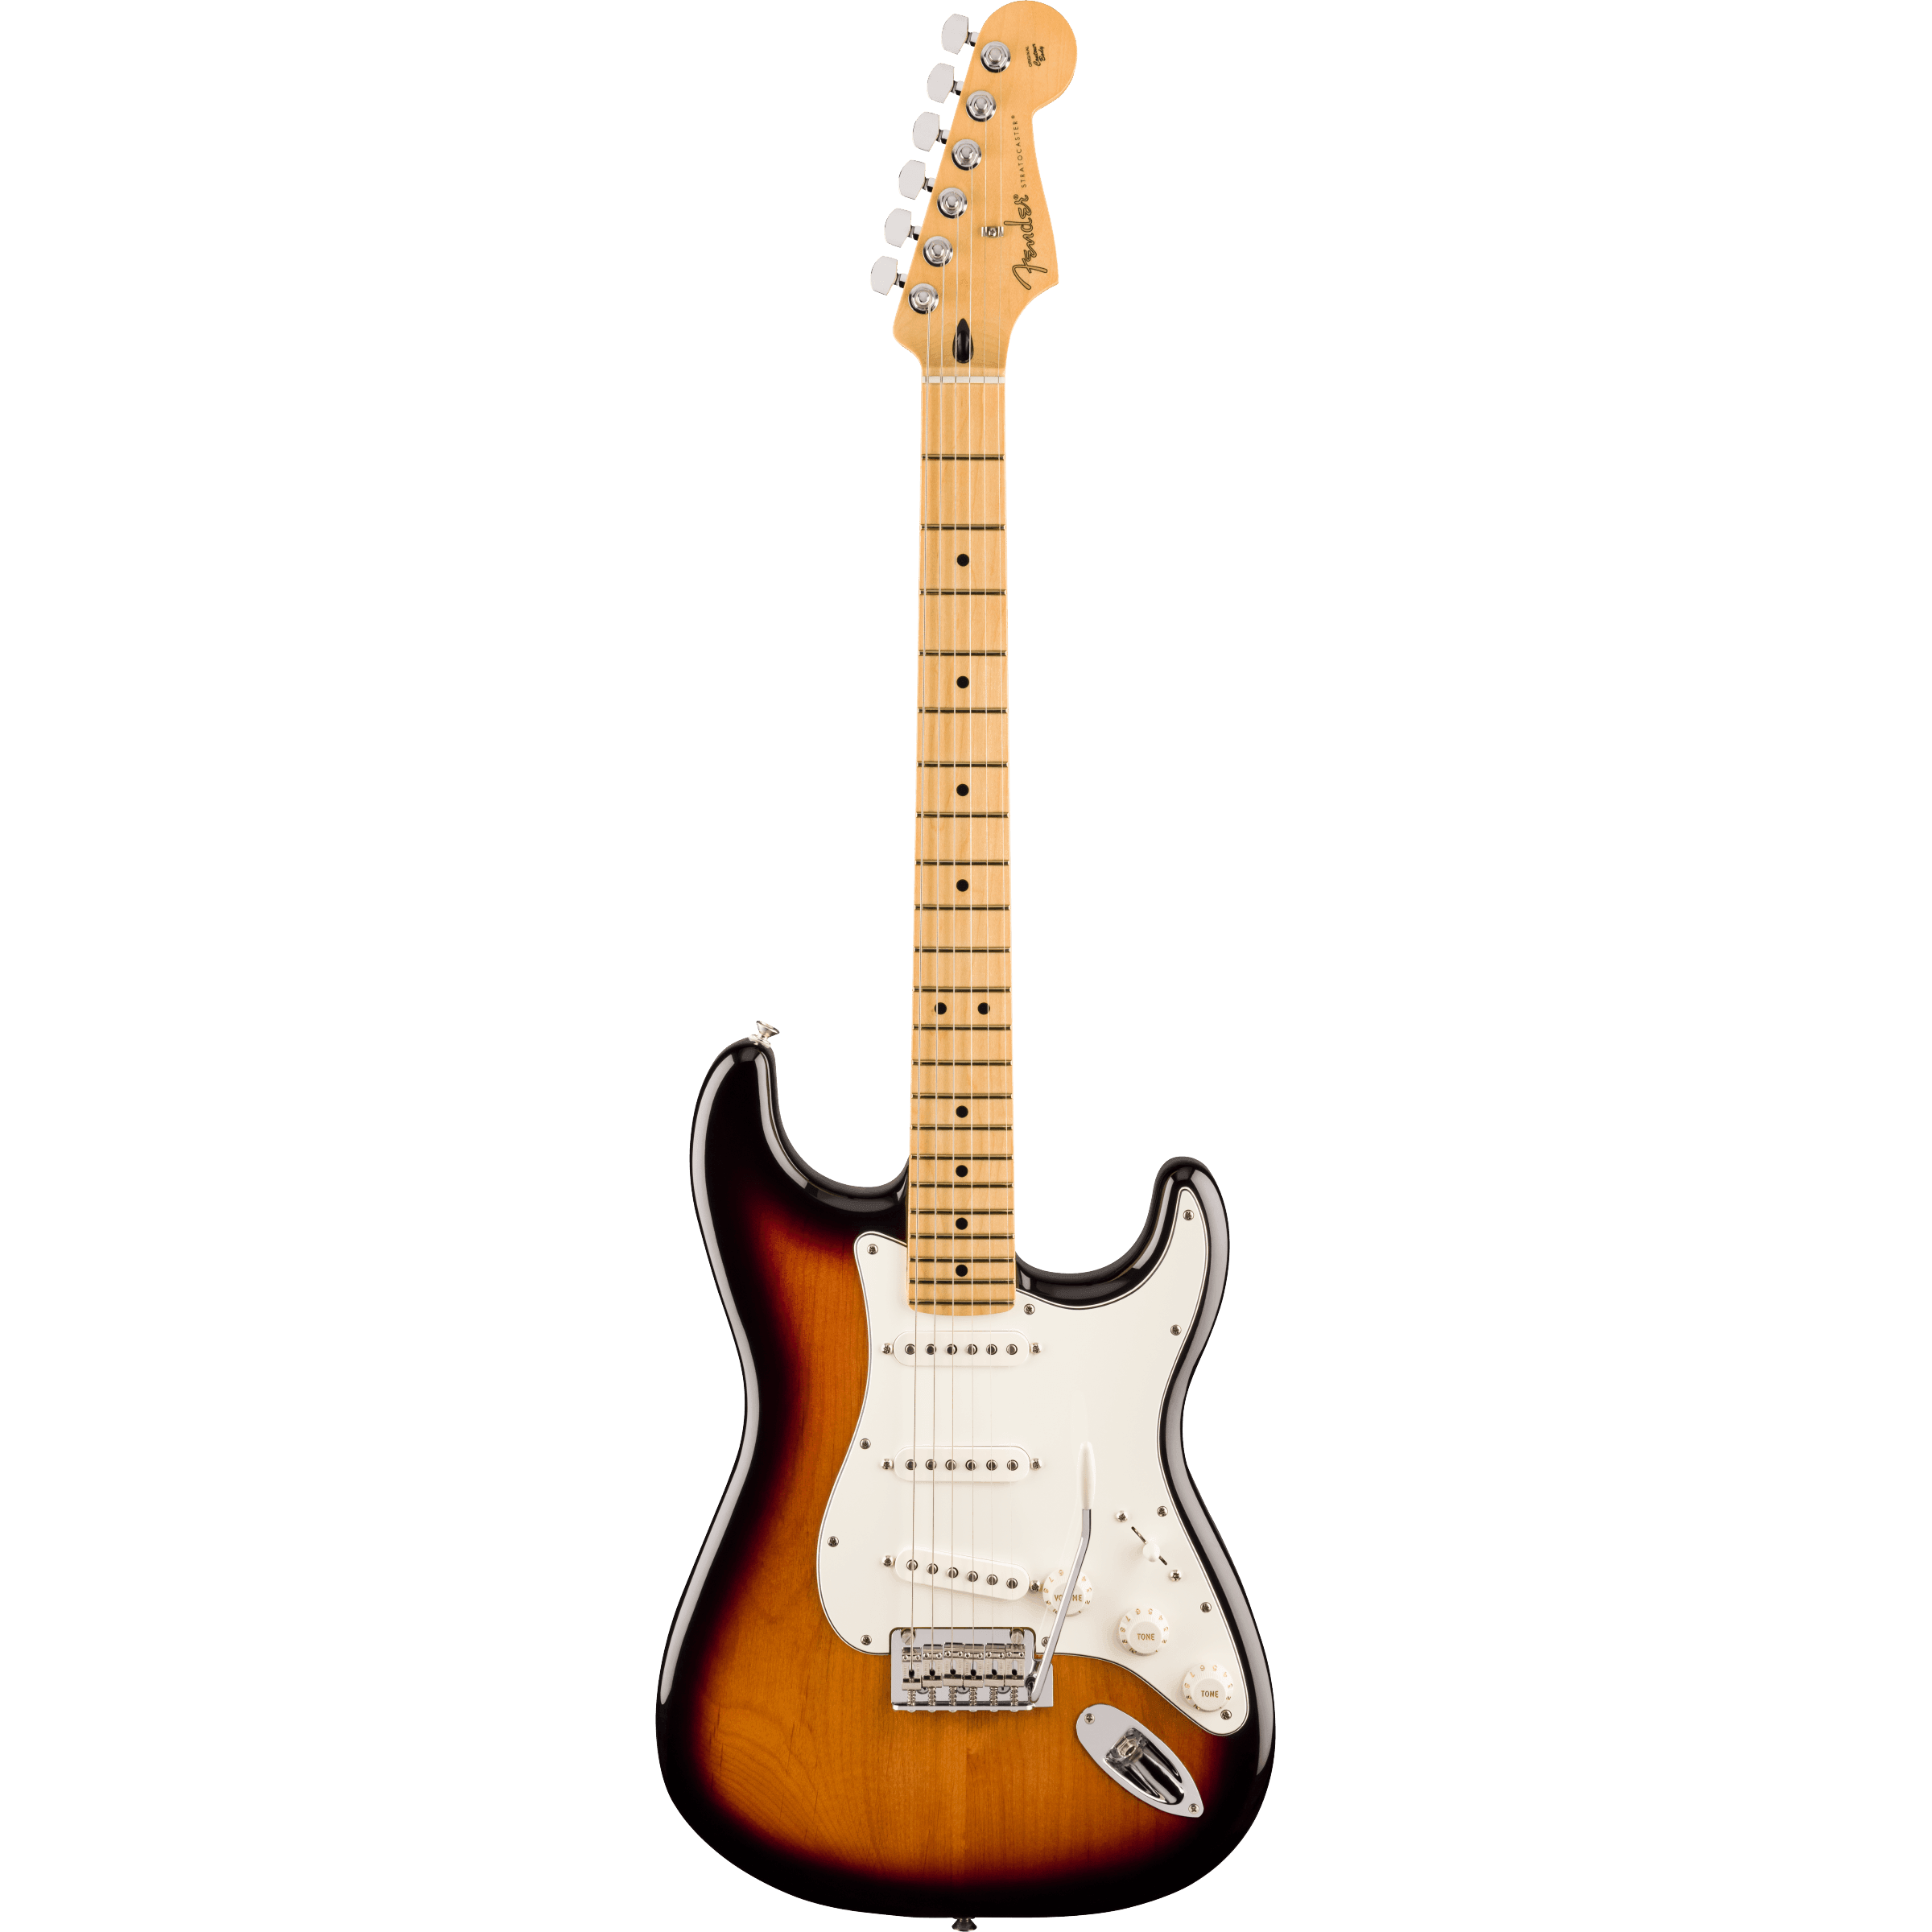 Player Strat Maple Neck Two-Tone Sunburst - Guitars - Electric by Fender at Muso's Stuff